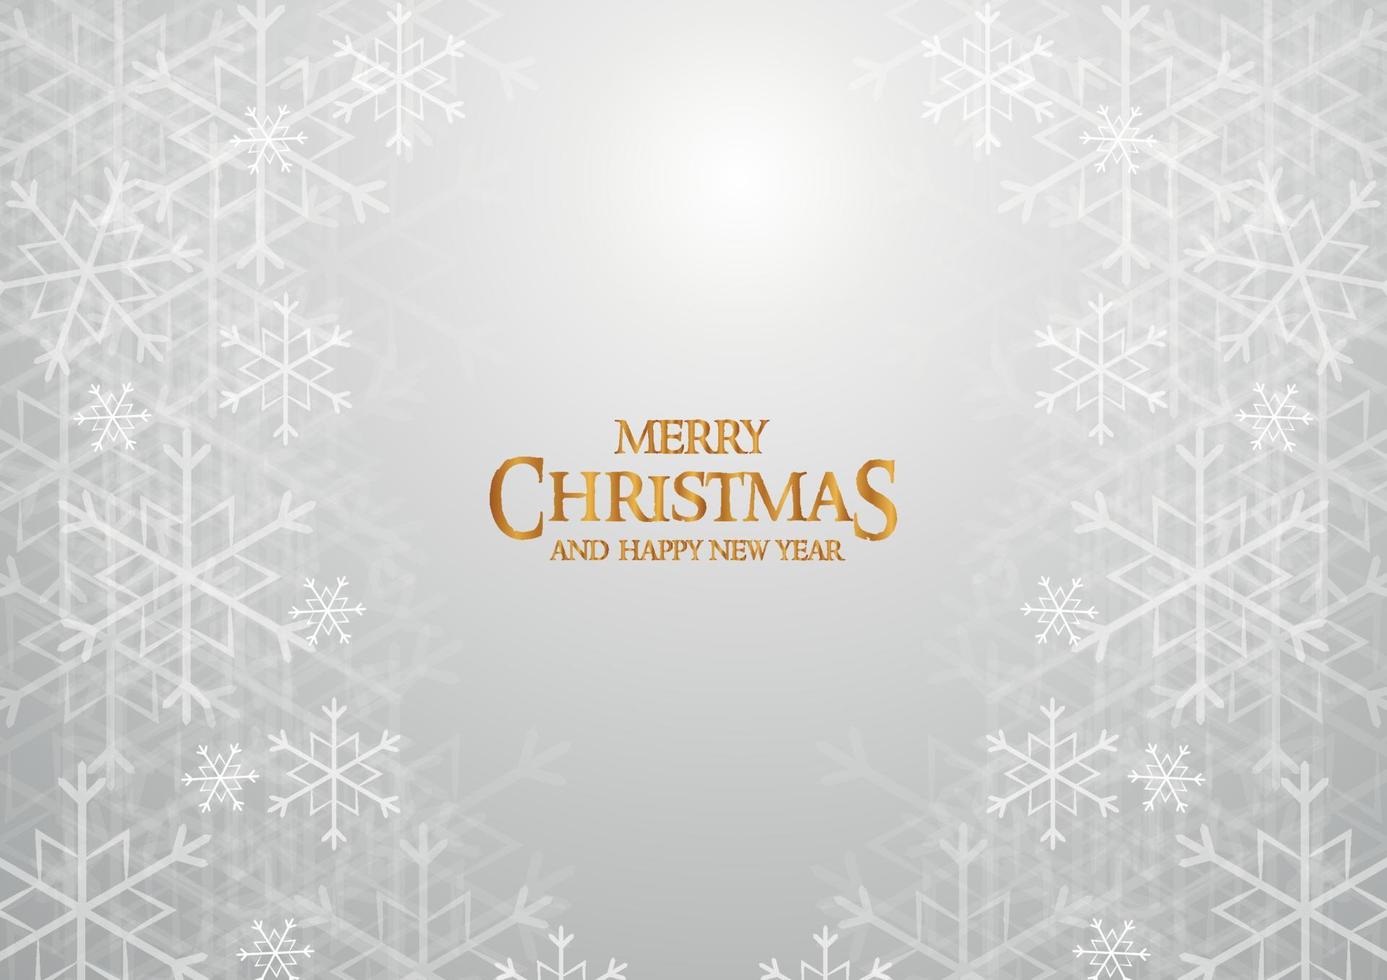 Merry Christmas and new year illustration with white snowflake and golden text effect vector